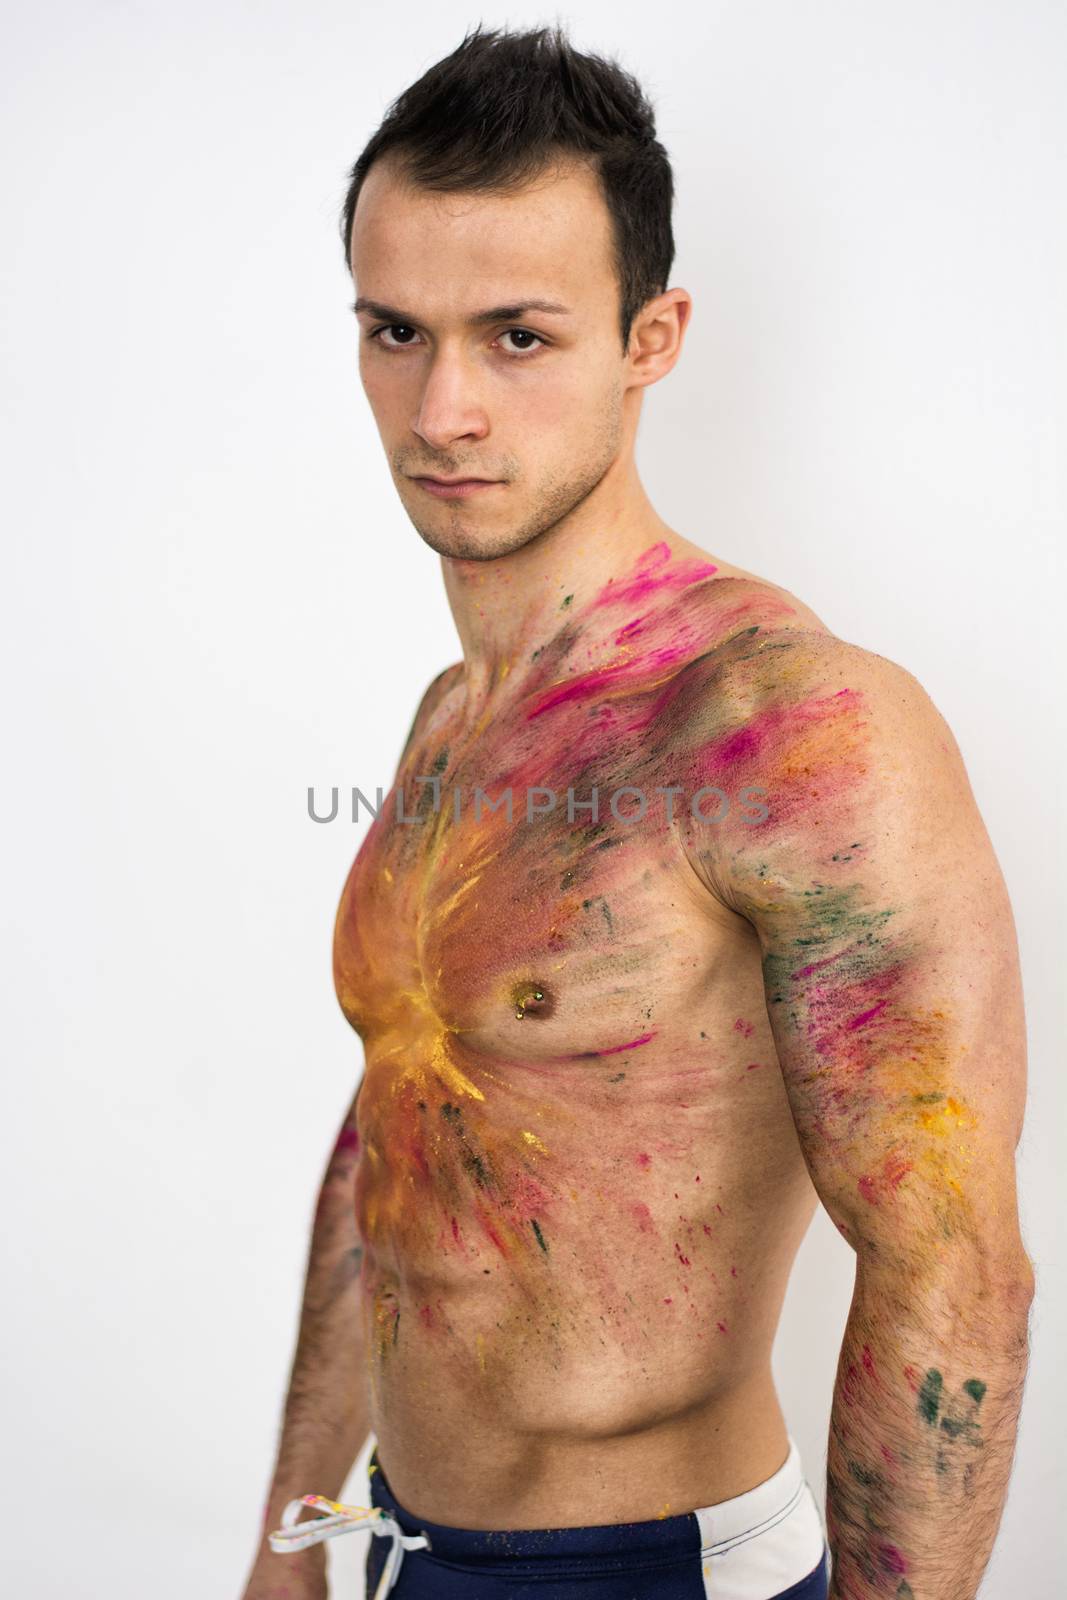 Muscular young man shirtless with skin painted with Holi colors, looking at camera